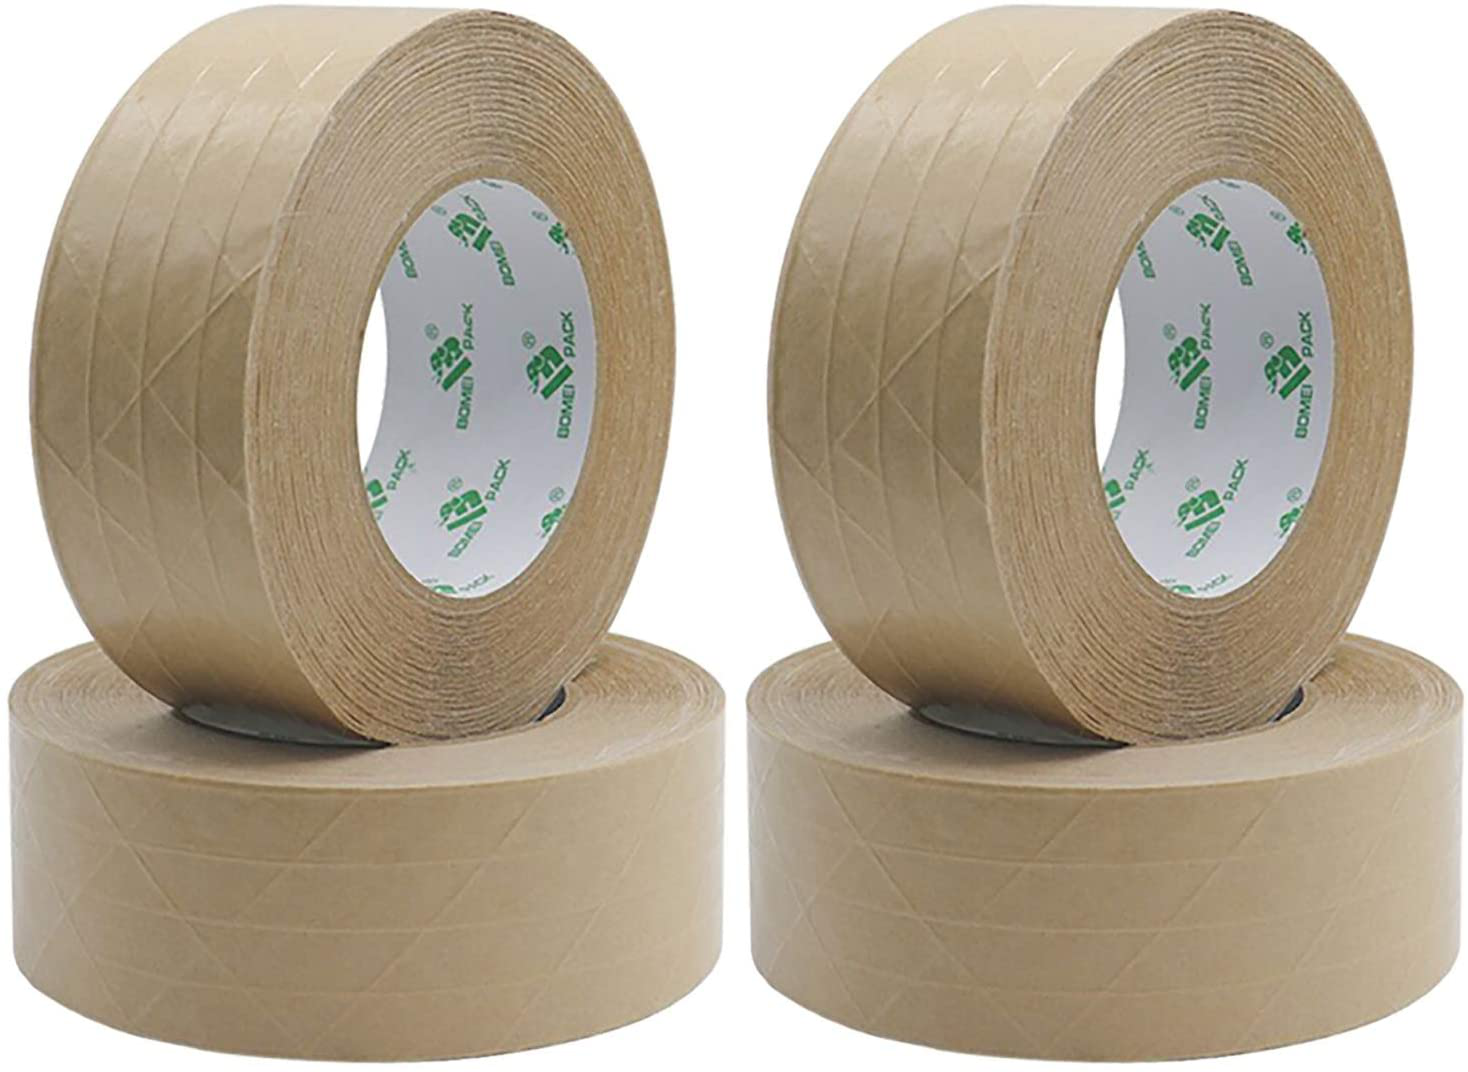 4Rolls Self Adhesive Reinforced Kraft Packing Paper Tape, 2inch 55yds, Total 220yds Gummed Tape for Heavy Duty Box Packing, Shipping, Moving and Storage, BOMEI PACK